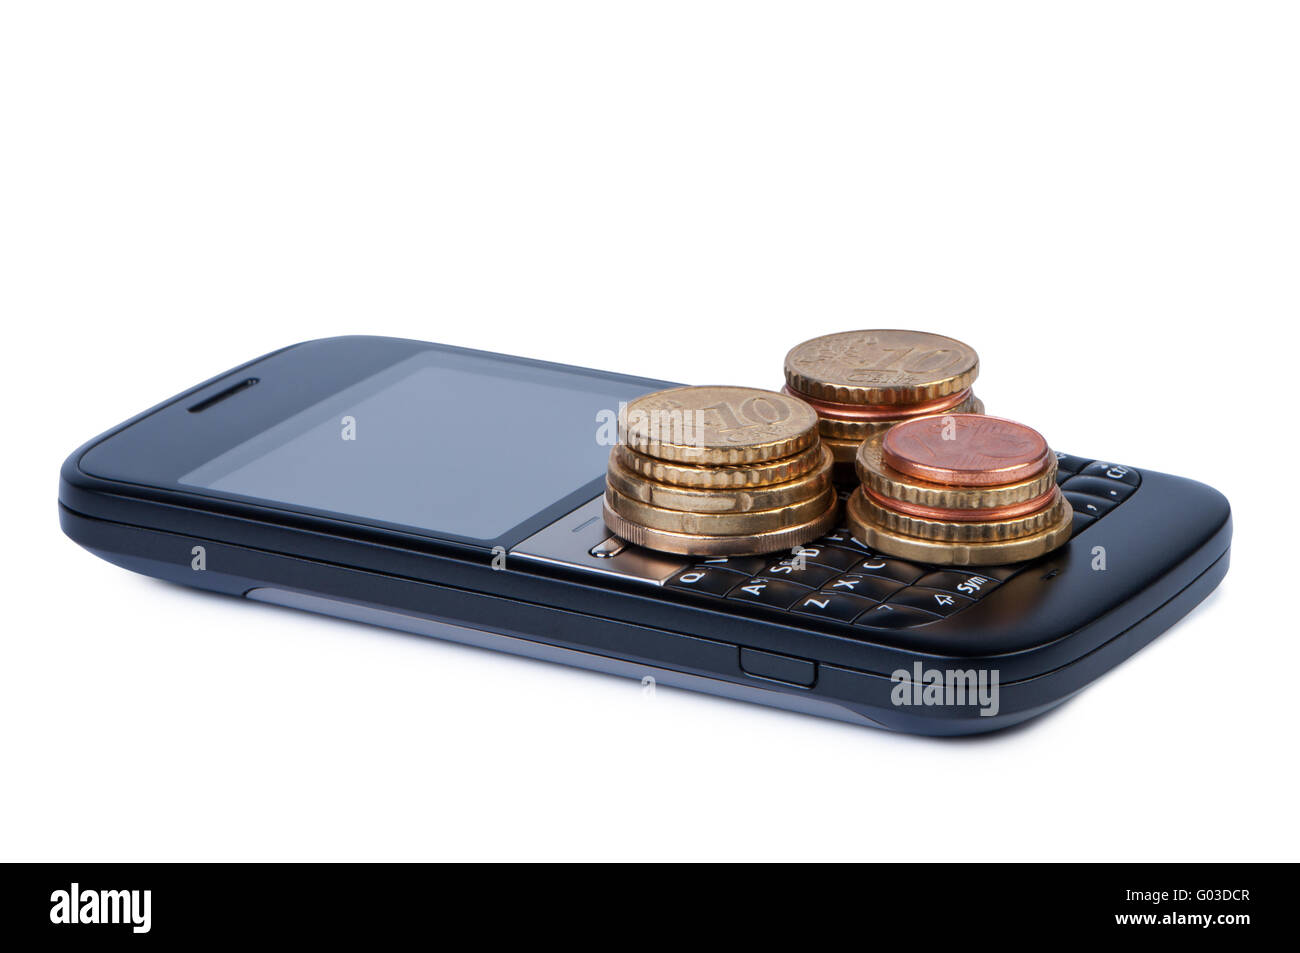 Cell phone with coins. Concept of payment and savings. Stock Photo